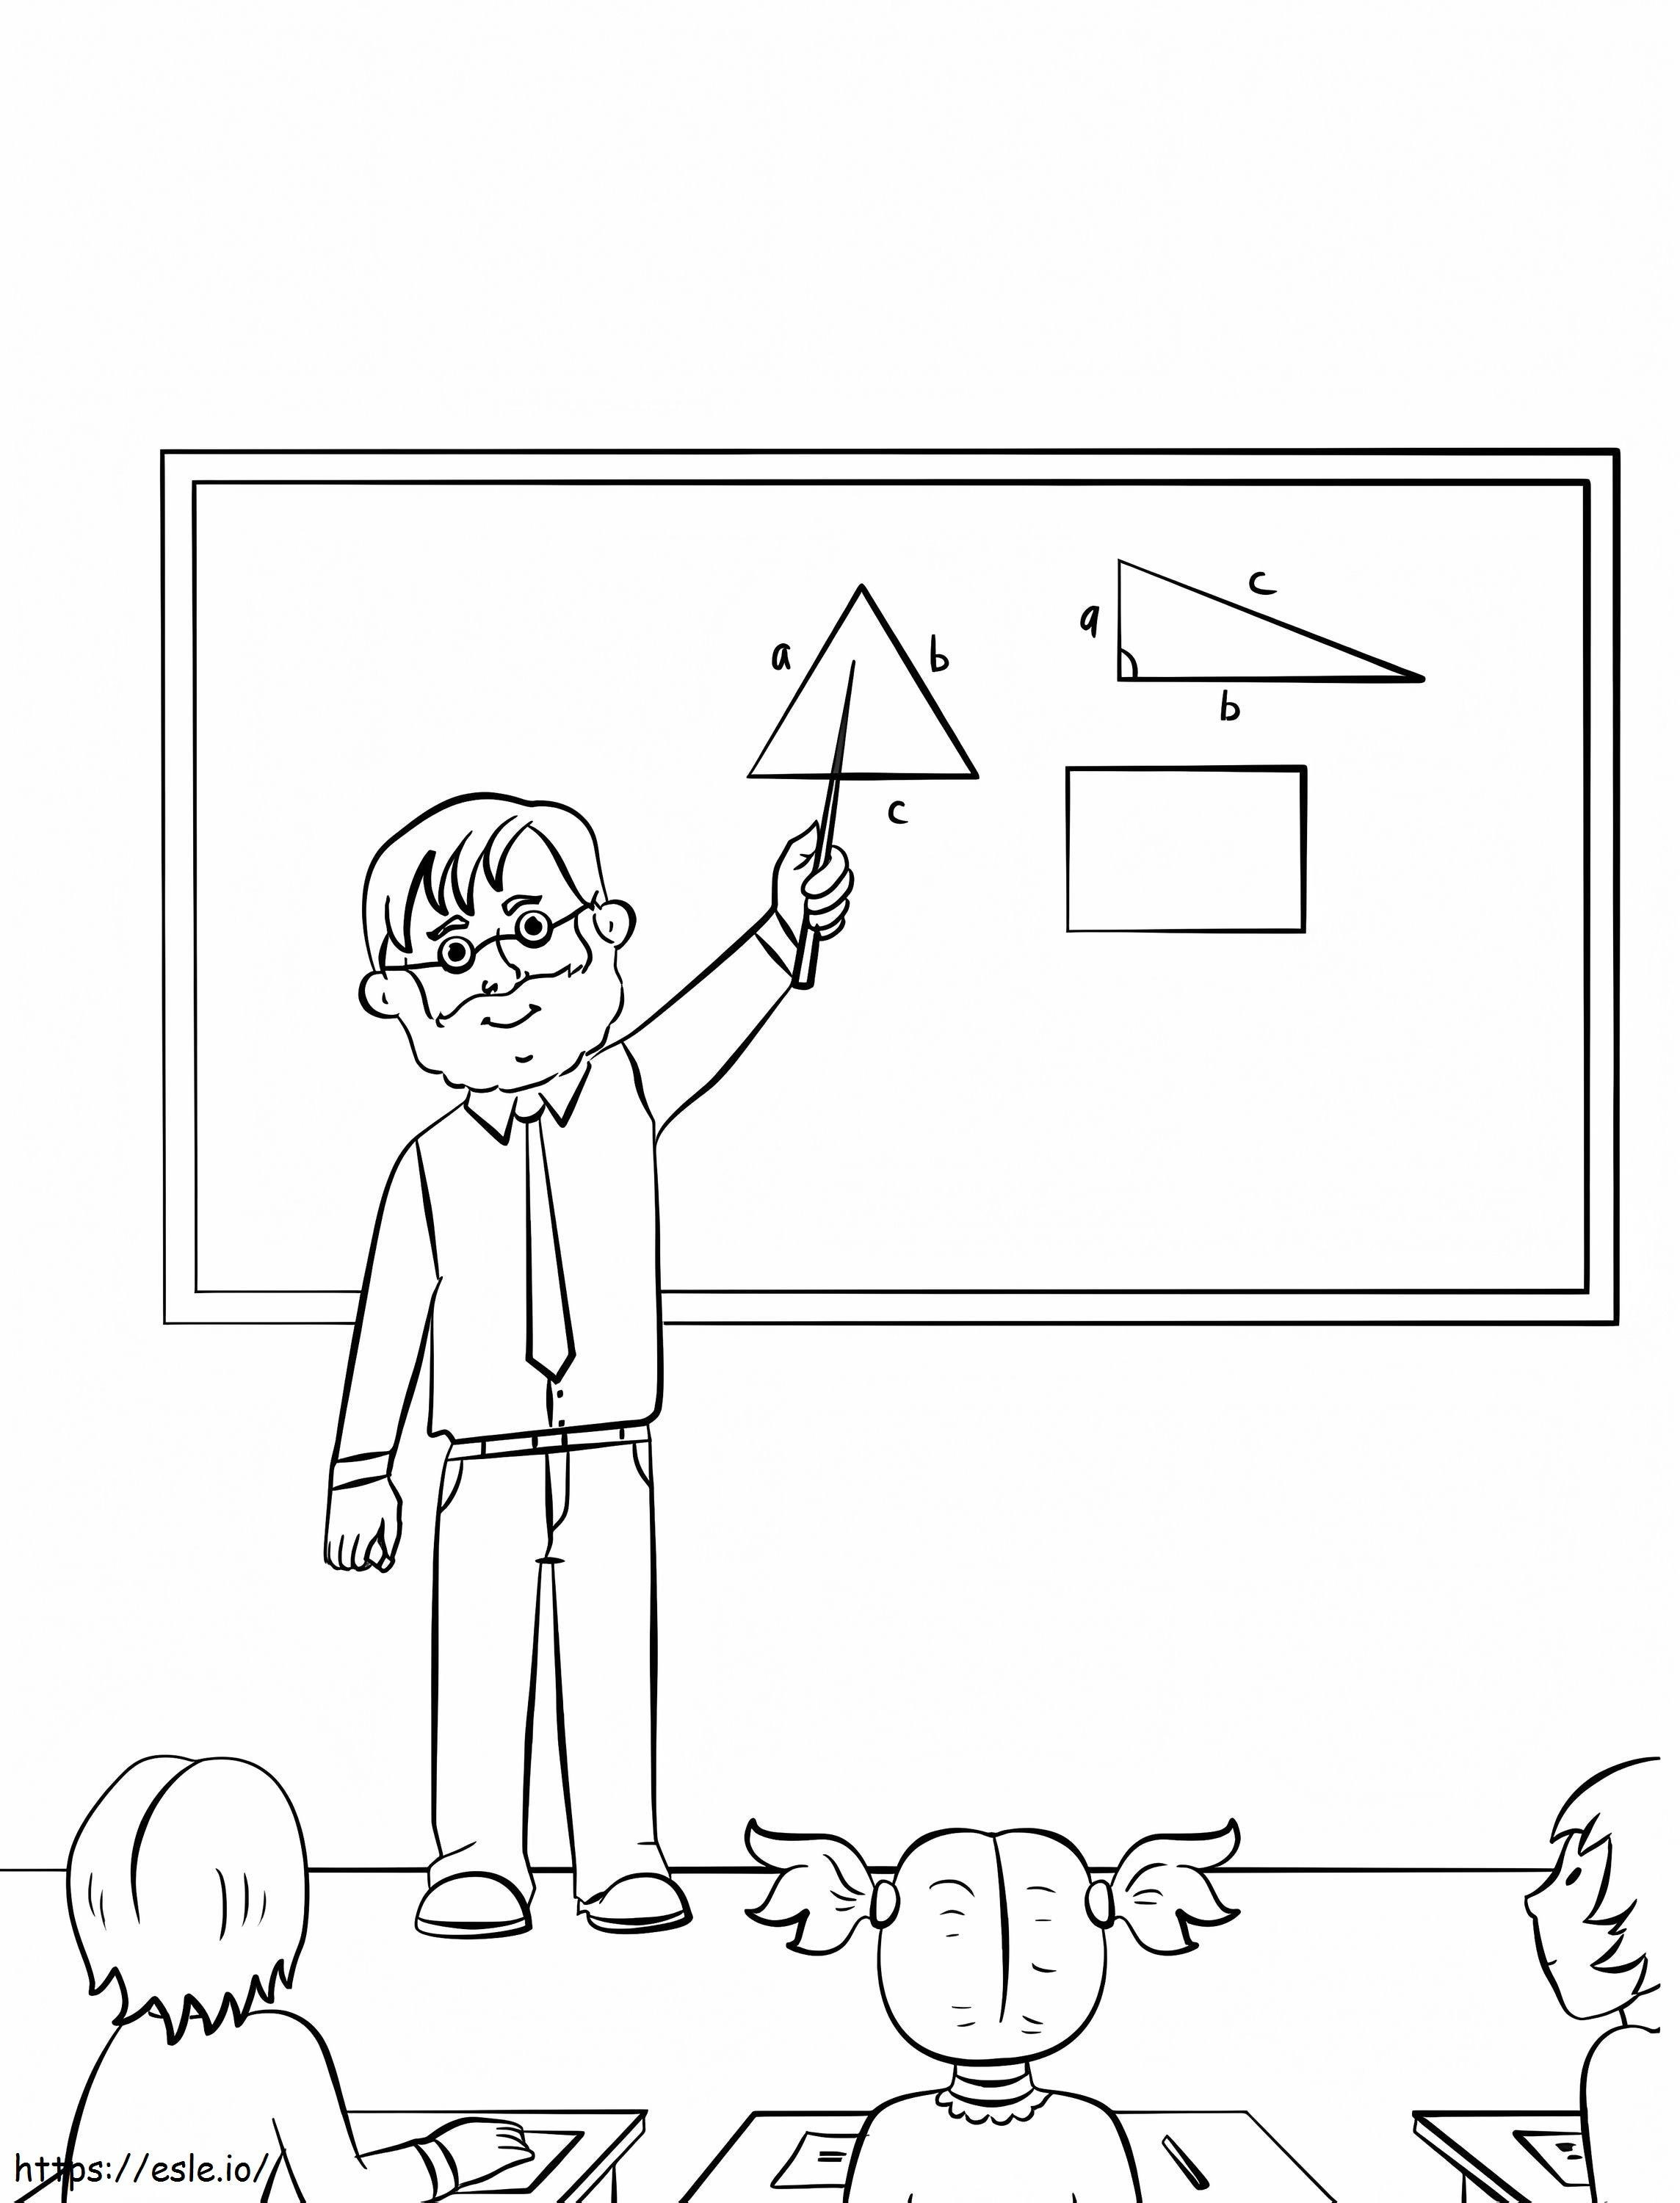 Male Teacher 1 coloring page